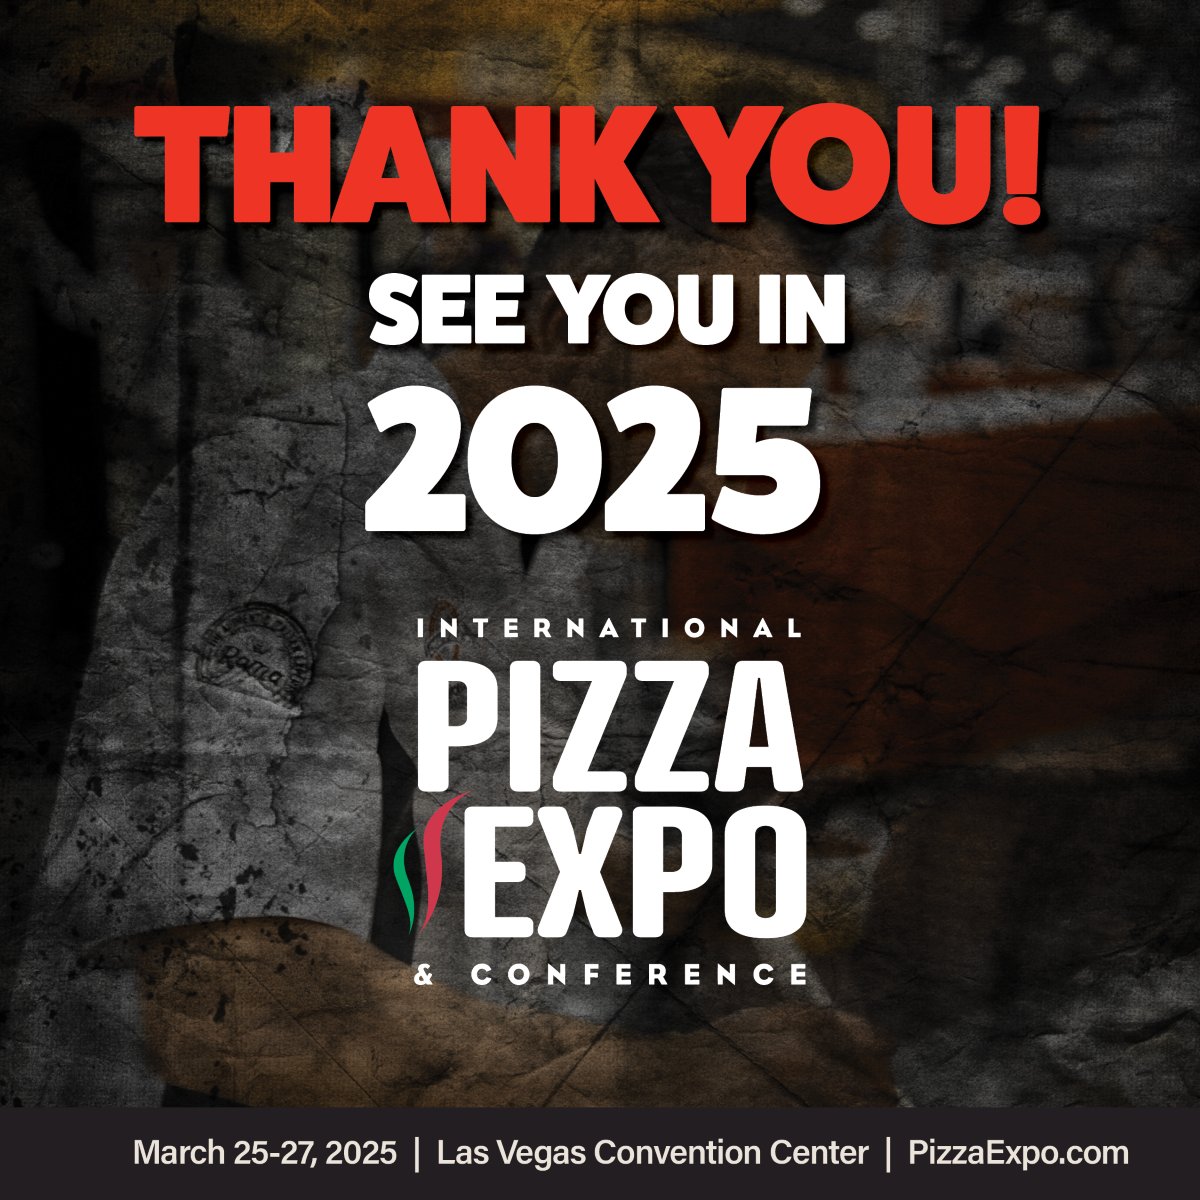 A heartfelt thank you to all attendees, exhibitors, sponsors, & partners who joined us on the show floor for a successful 40th International Pizza Expo! ❤️ We hope you had a blast, and we can't wait to welcome you back in 2025! 🌟 . #PizzaExpo #PizzaToday #PizzaCon #Expo